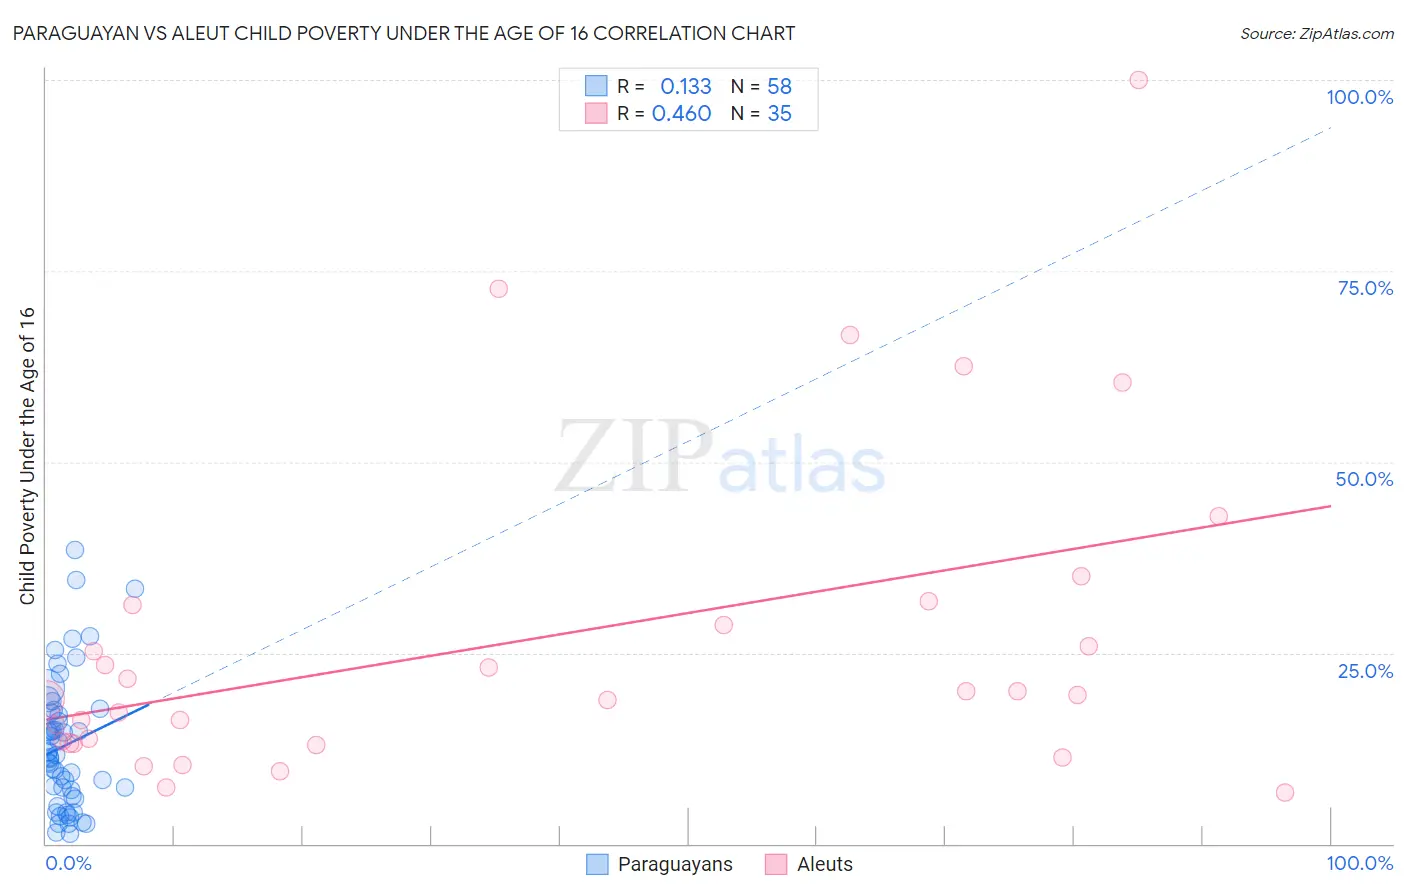 Paraguayan vs Aleut Child Poverty Under the Age of 16